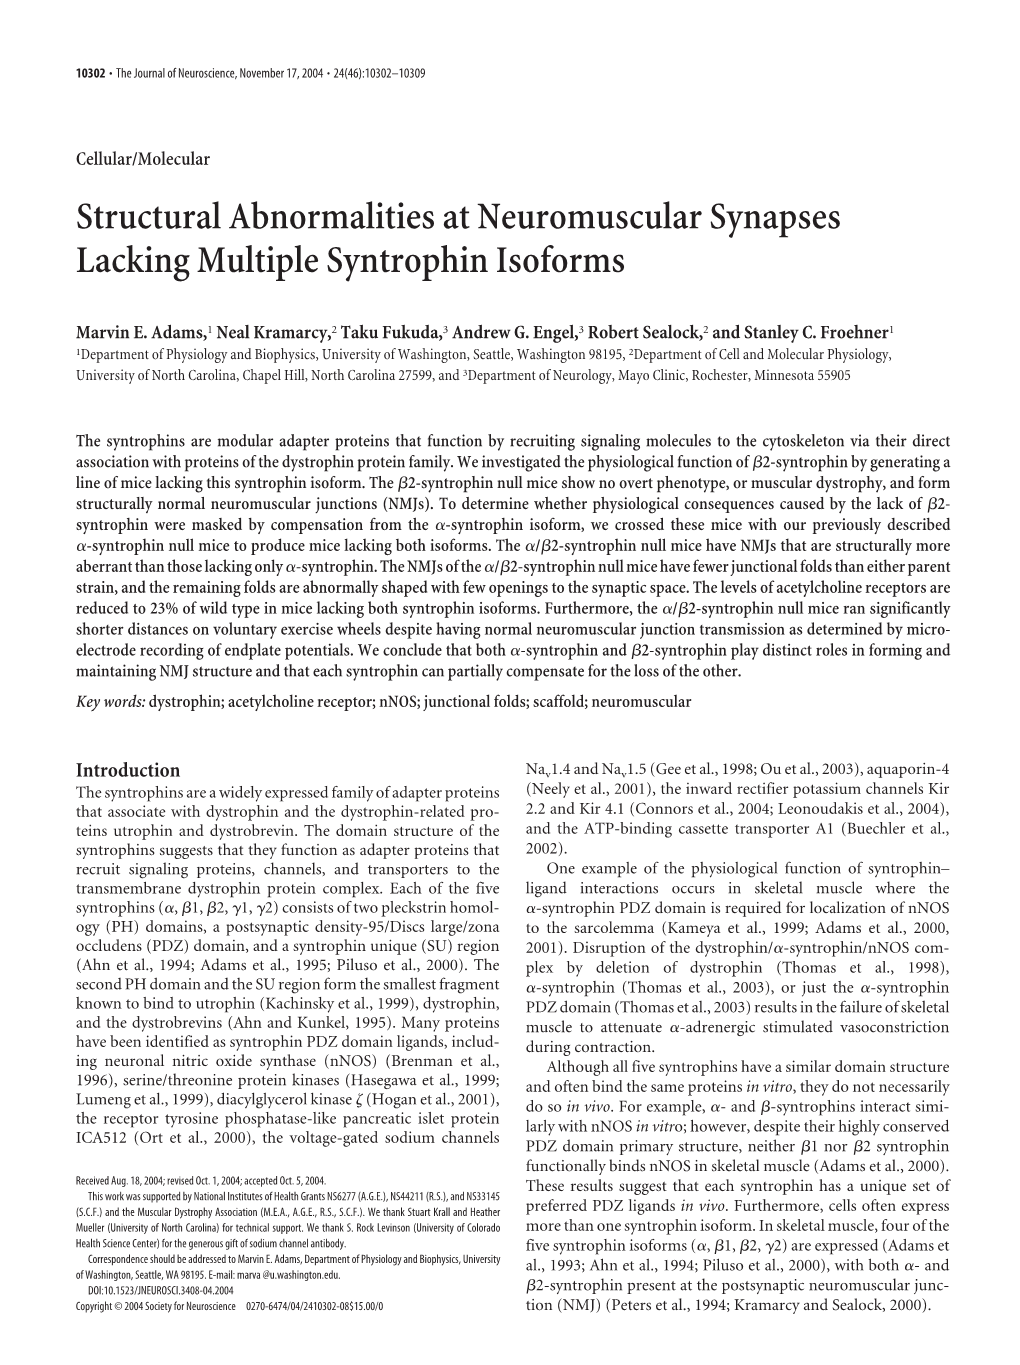 Structural Abnormalities at Neuromuscular Synapses Lacking Multiple Syntrophin Isoforms